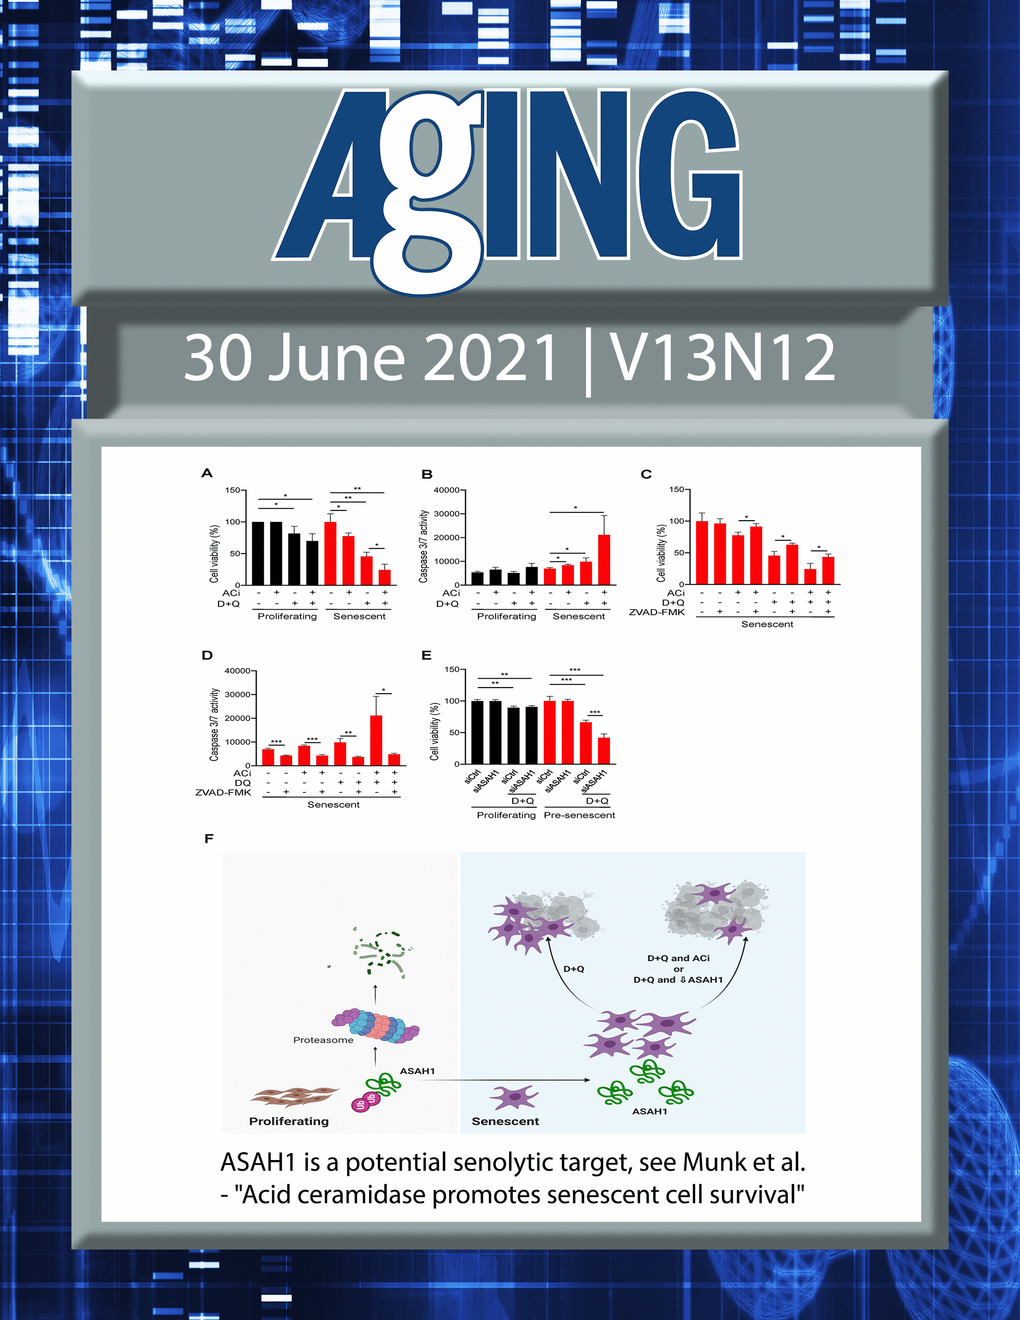 The cover features Figure 6 "ASAH1 is a potential senolytic target“ from Munk et al.